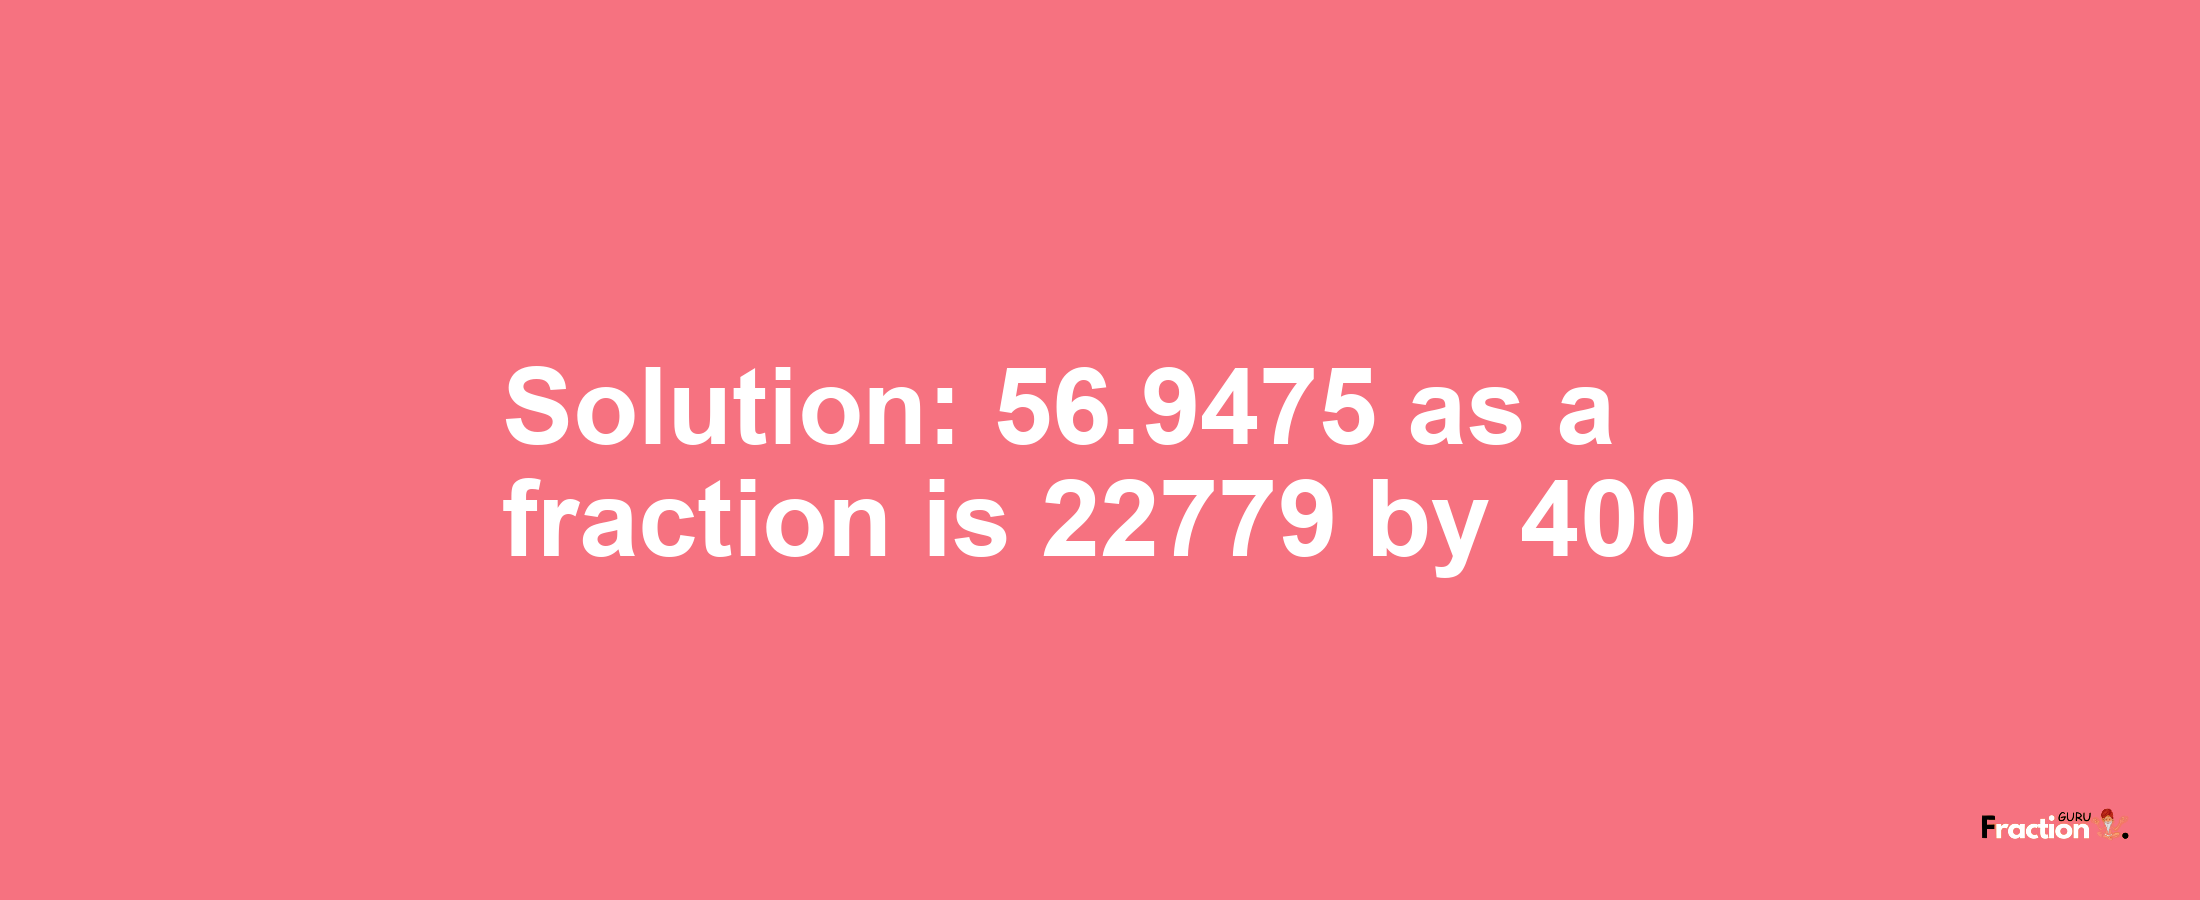 Solution:56.9475 as a fraction is 22779/400